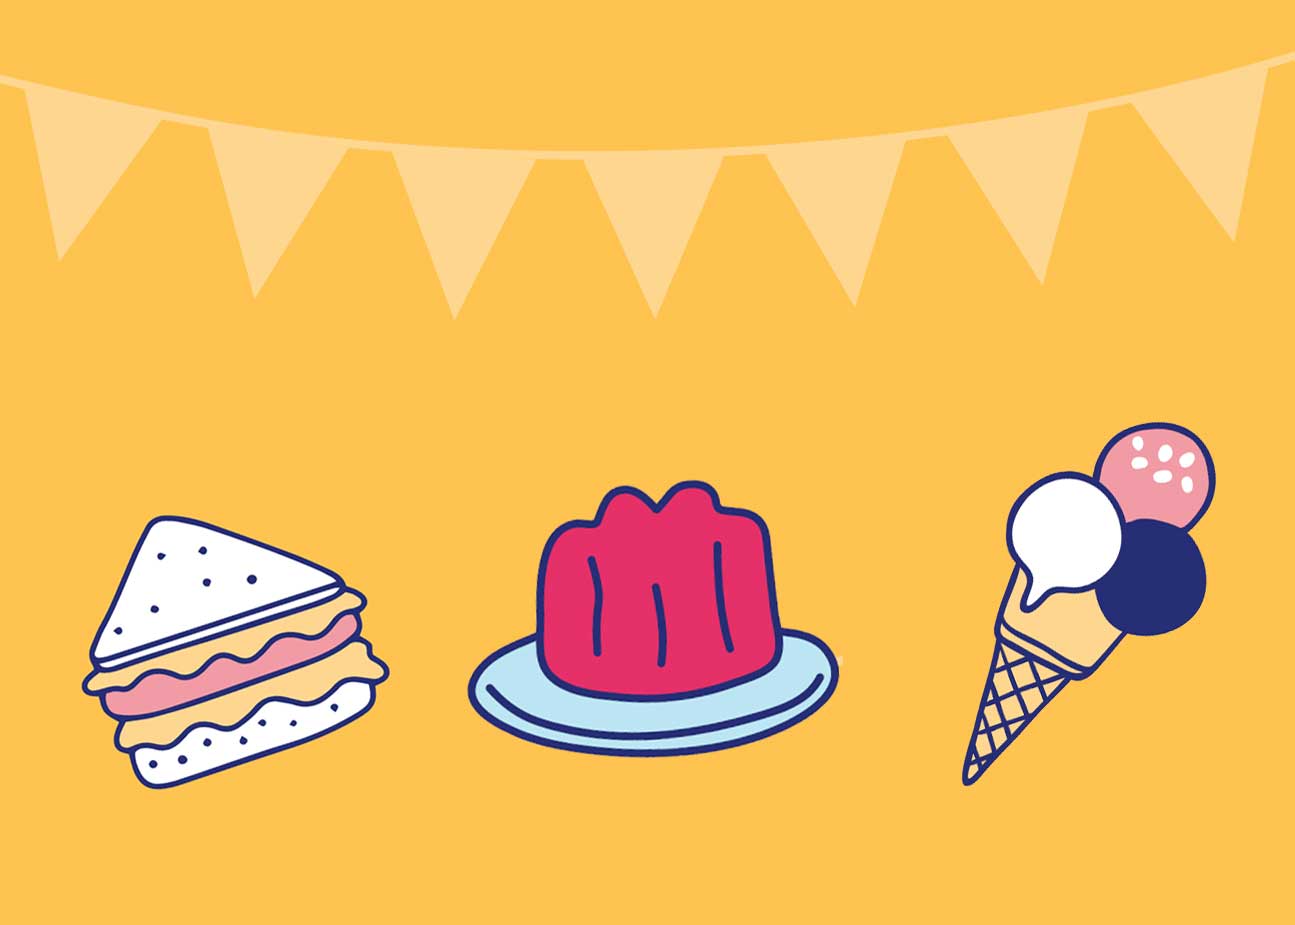 Colourful illustrations of a bowl of raspberry jelly, a sandwich and an ice cream cone below party bunting.